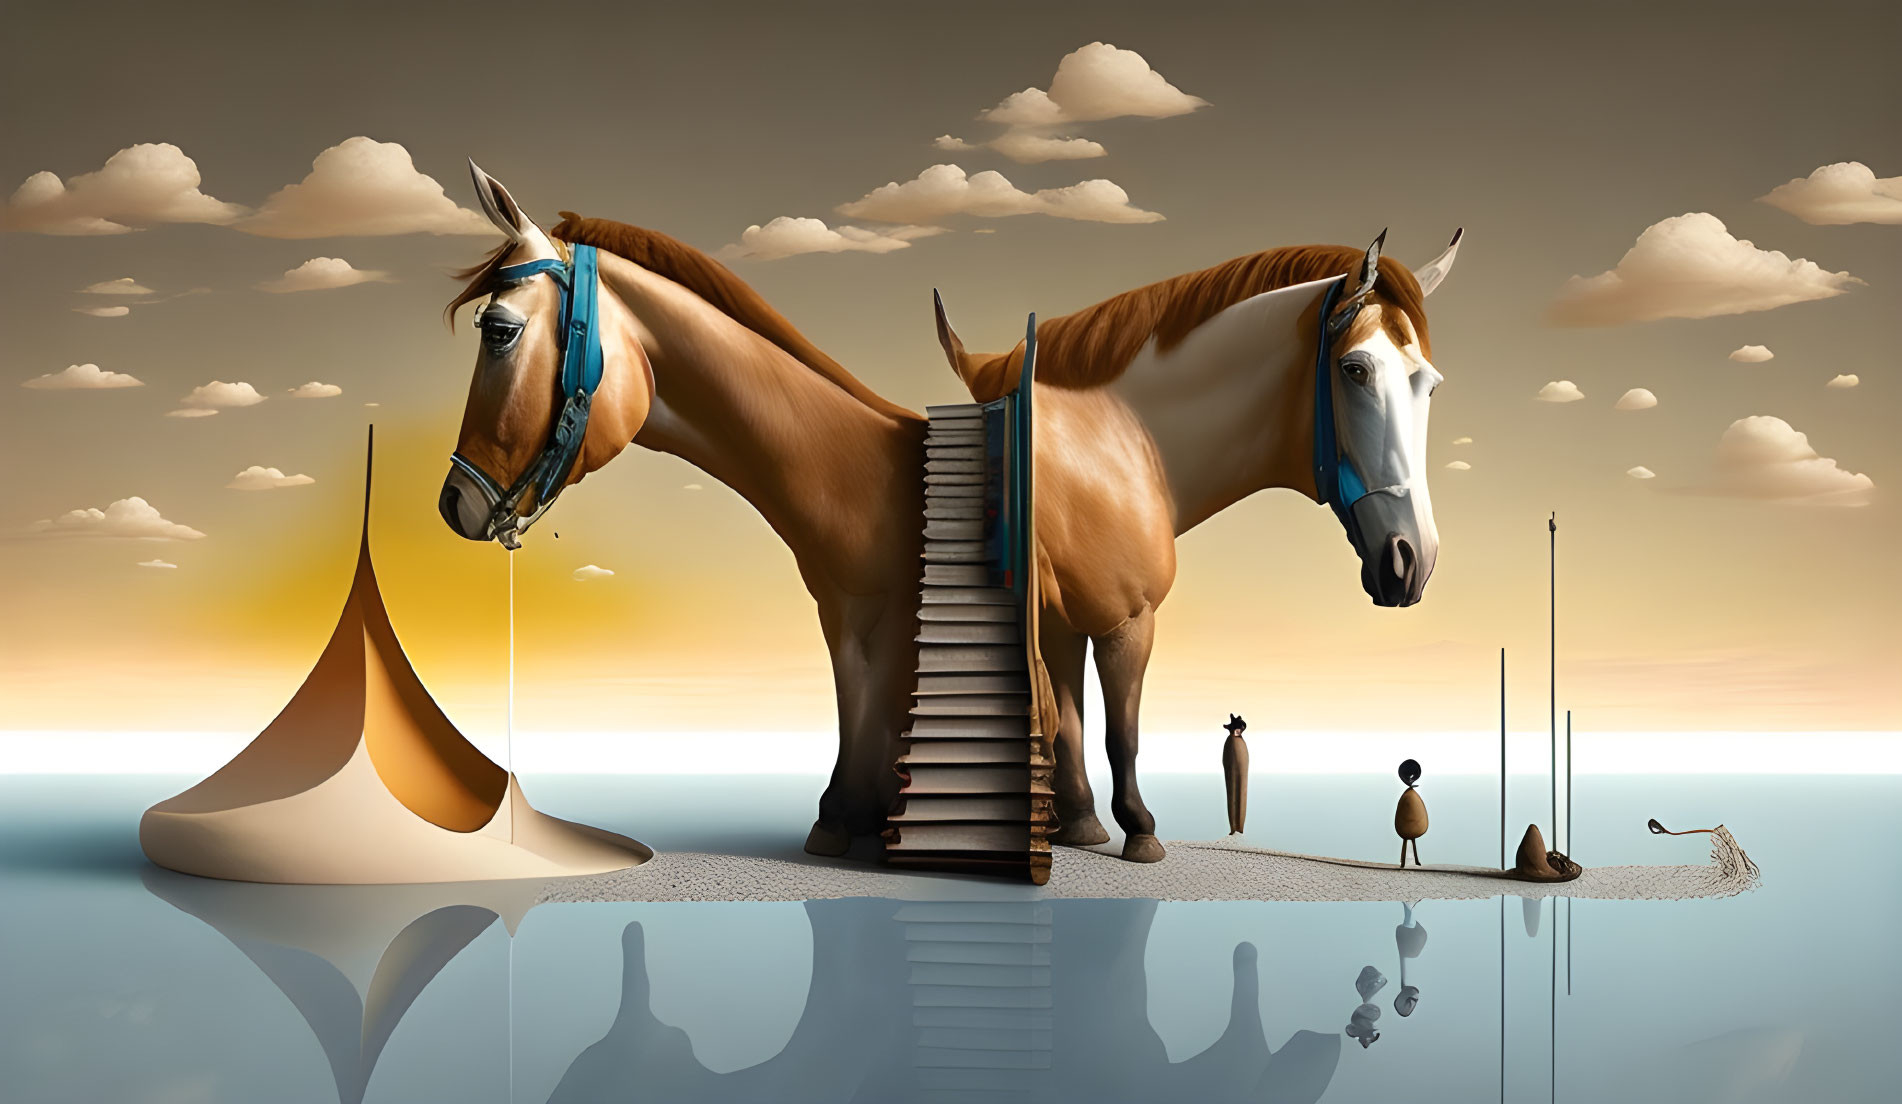 Surreal image: Two-headed horse on island with staircase, cloudy sunset sky